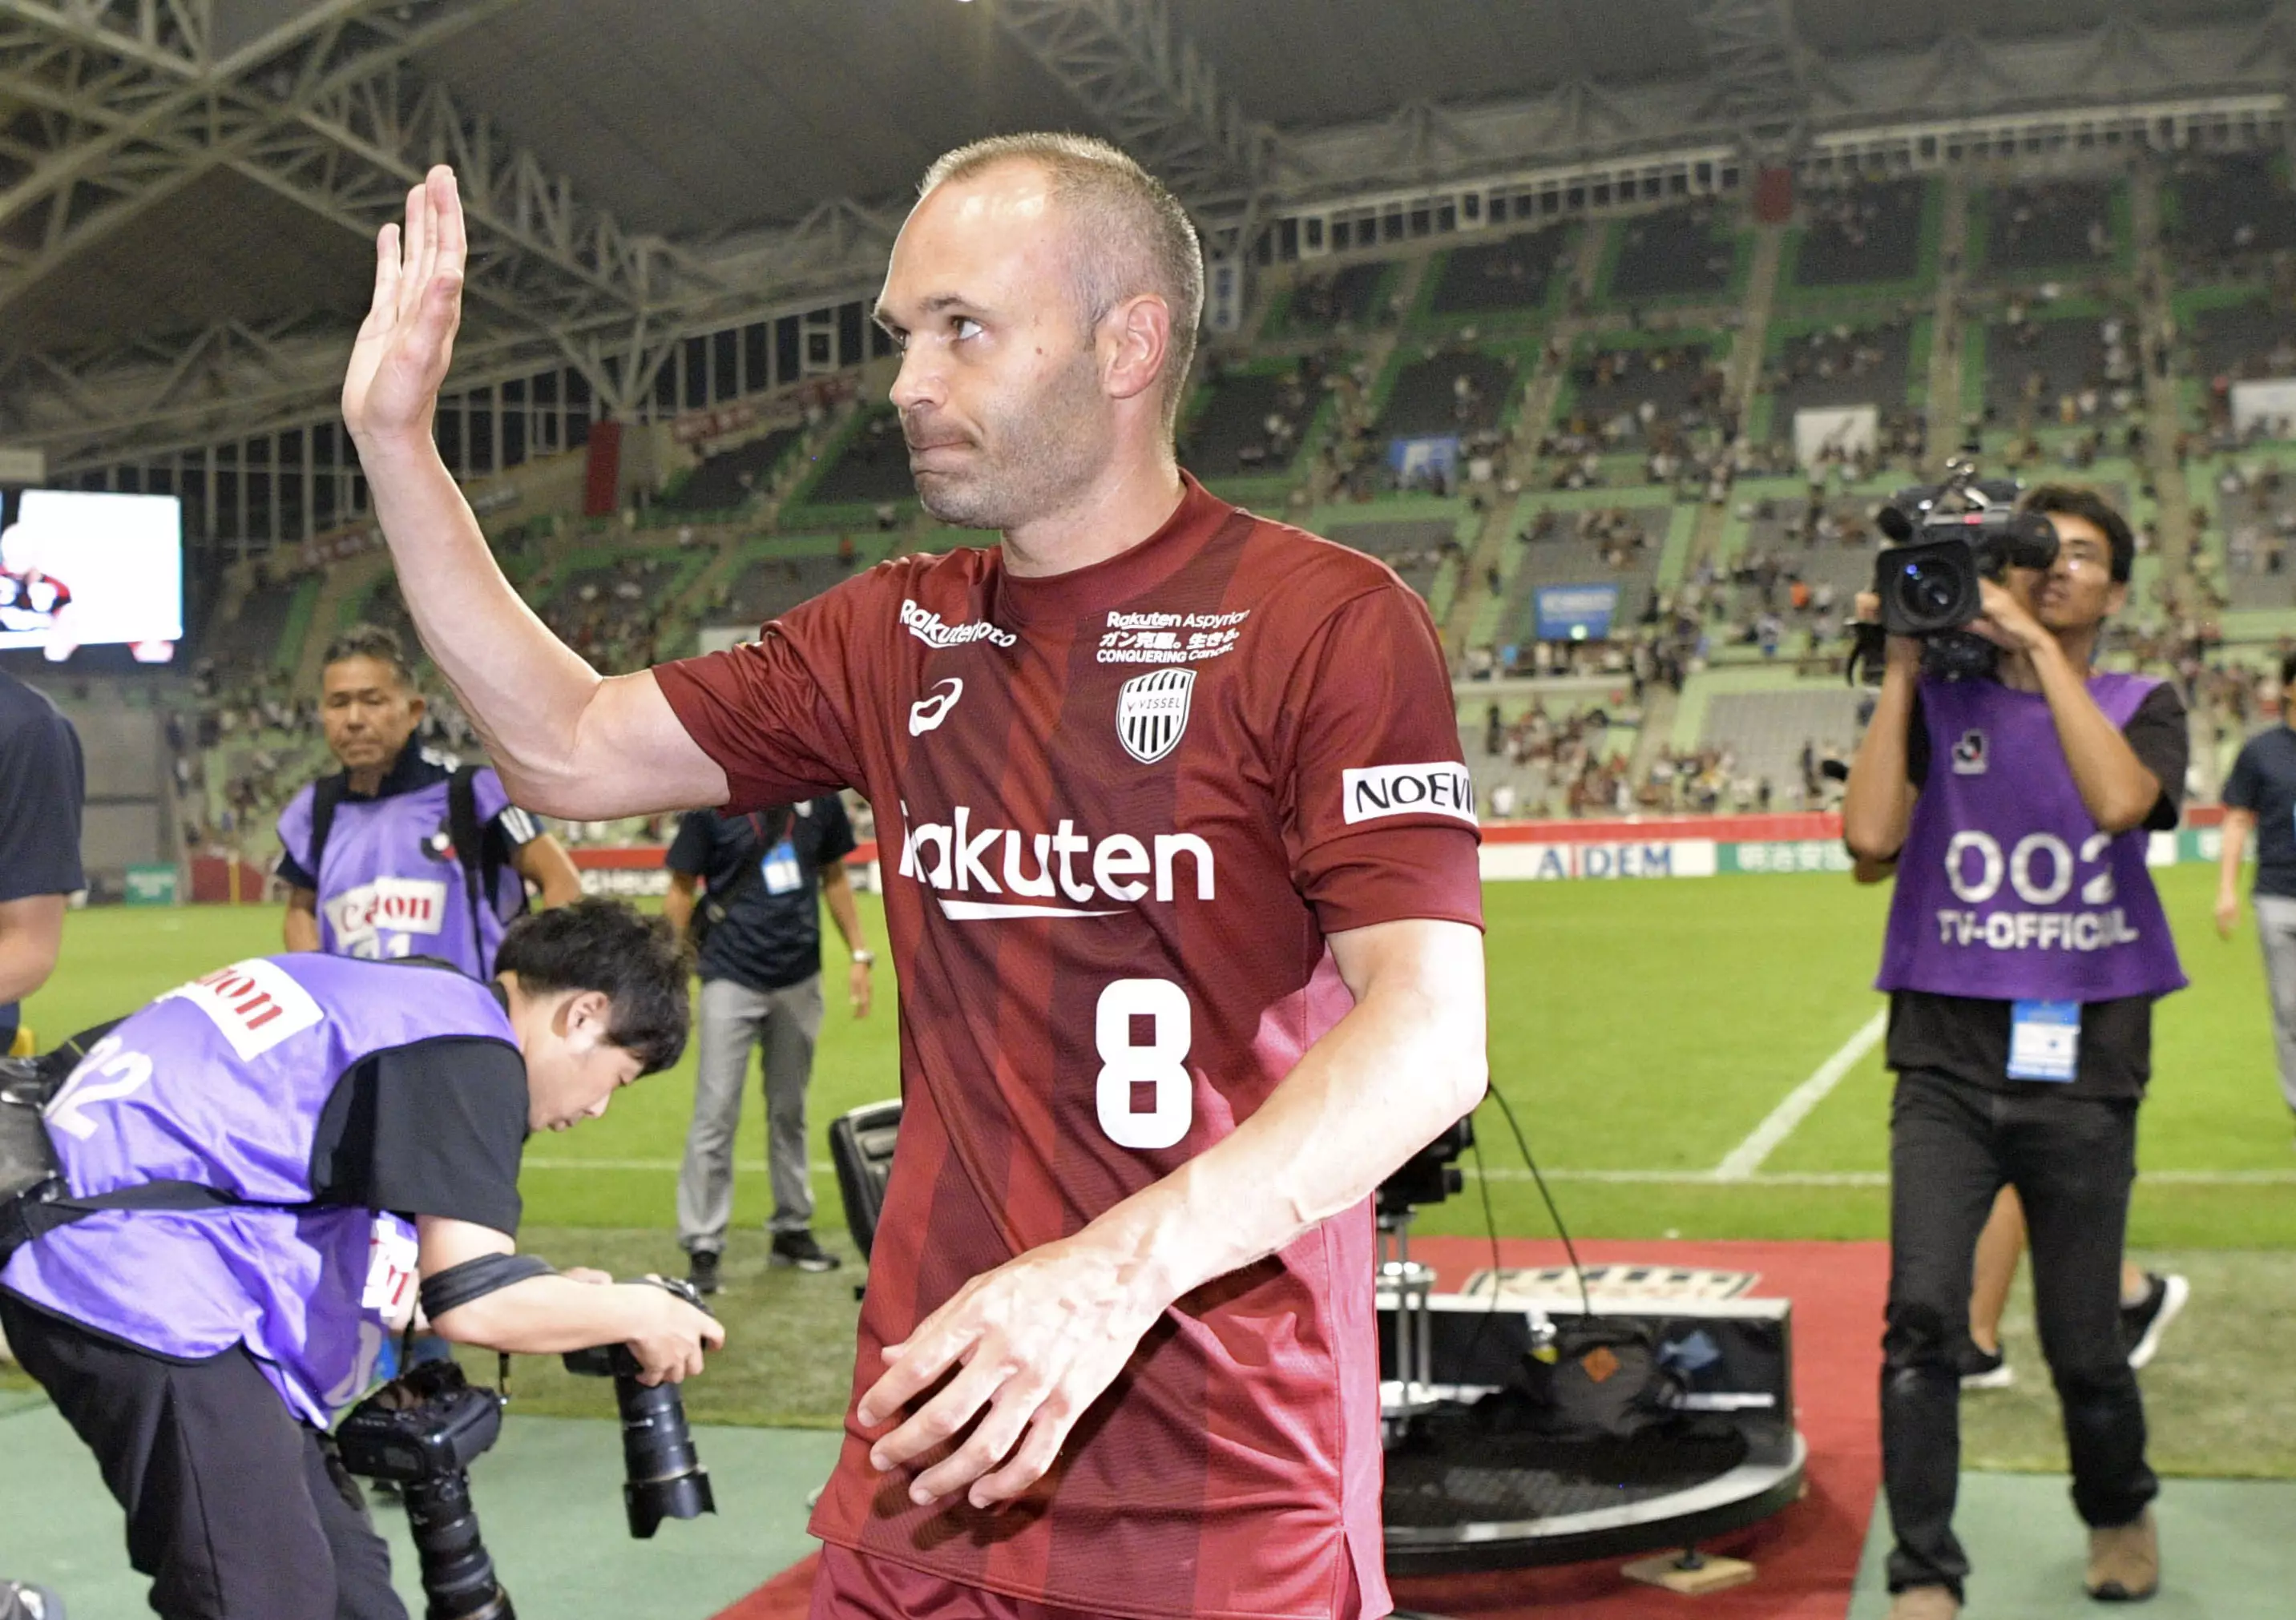 Iniesta waves to the fans. Image: PA